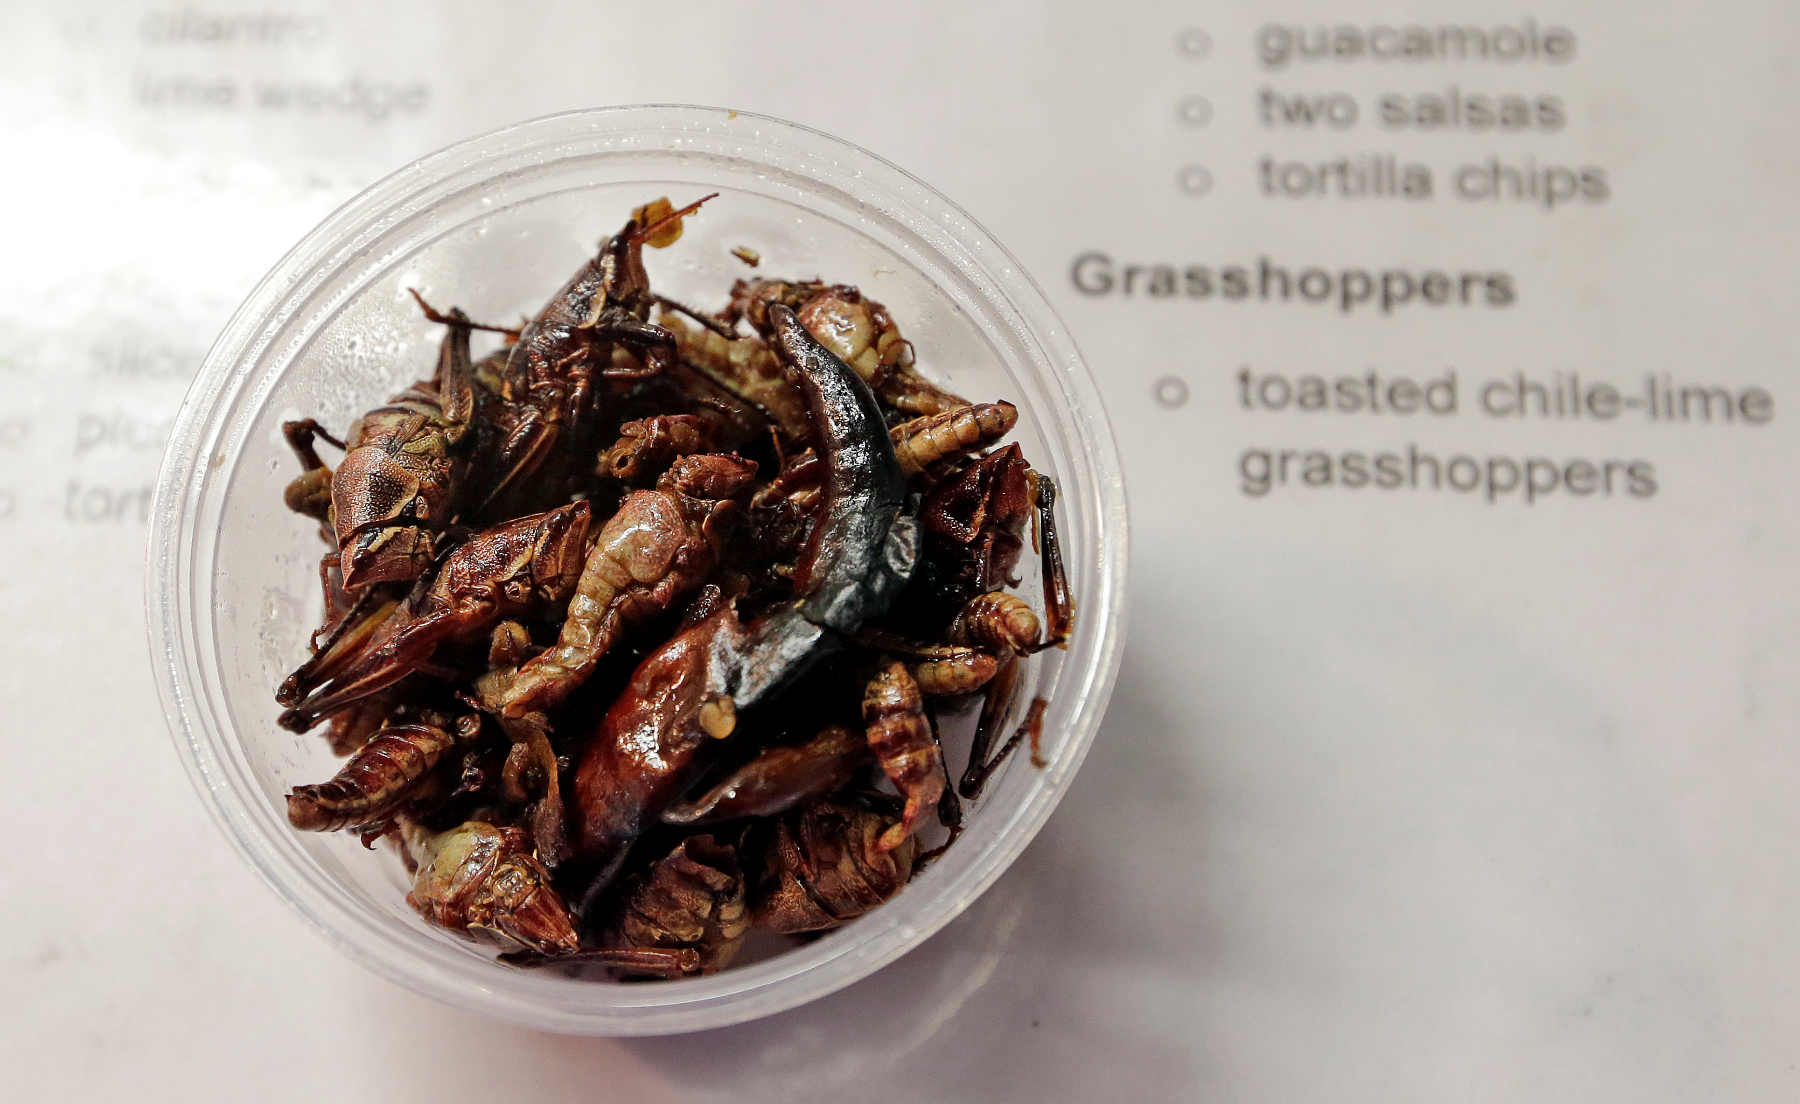 Grasshoppers are just one non-conventional item appearing on ball park menus this summer. / The Associated Press